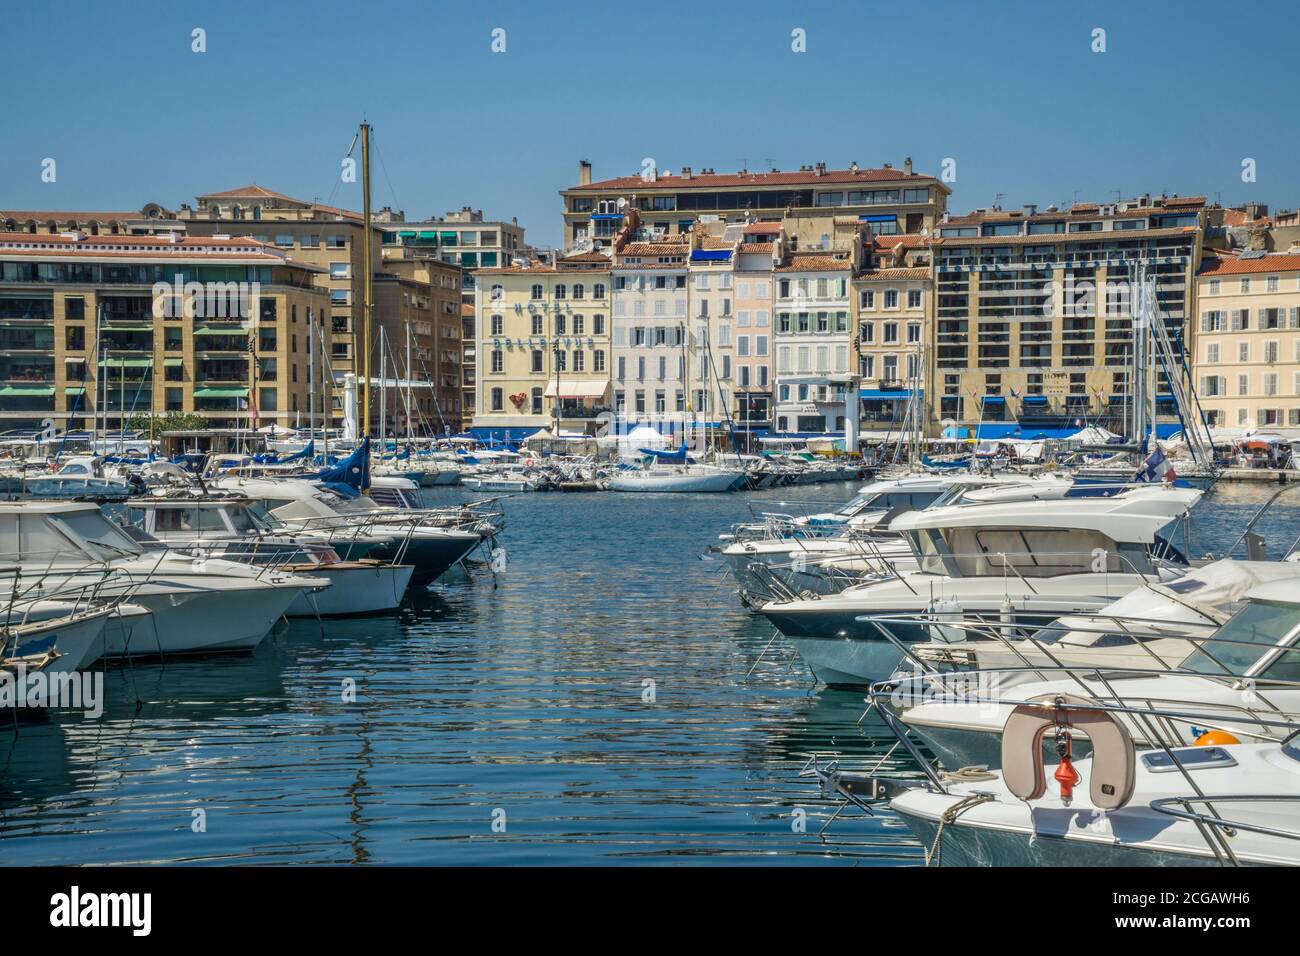 motor yachts moored at Vieux Port, the Old Port of Marseille, Bouches-du-Rhône department, France Stock Photo